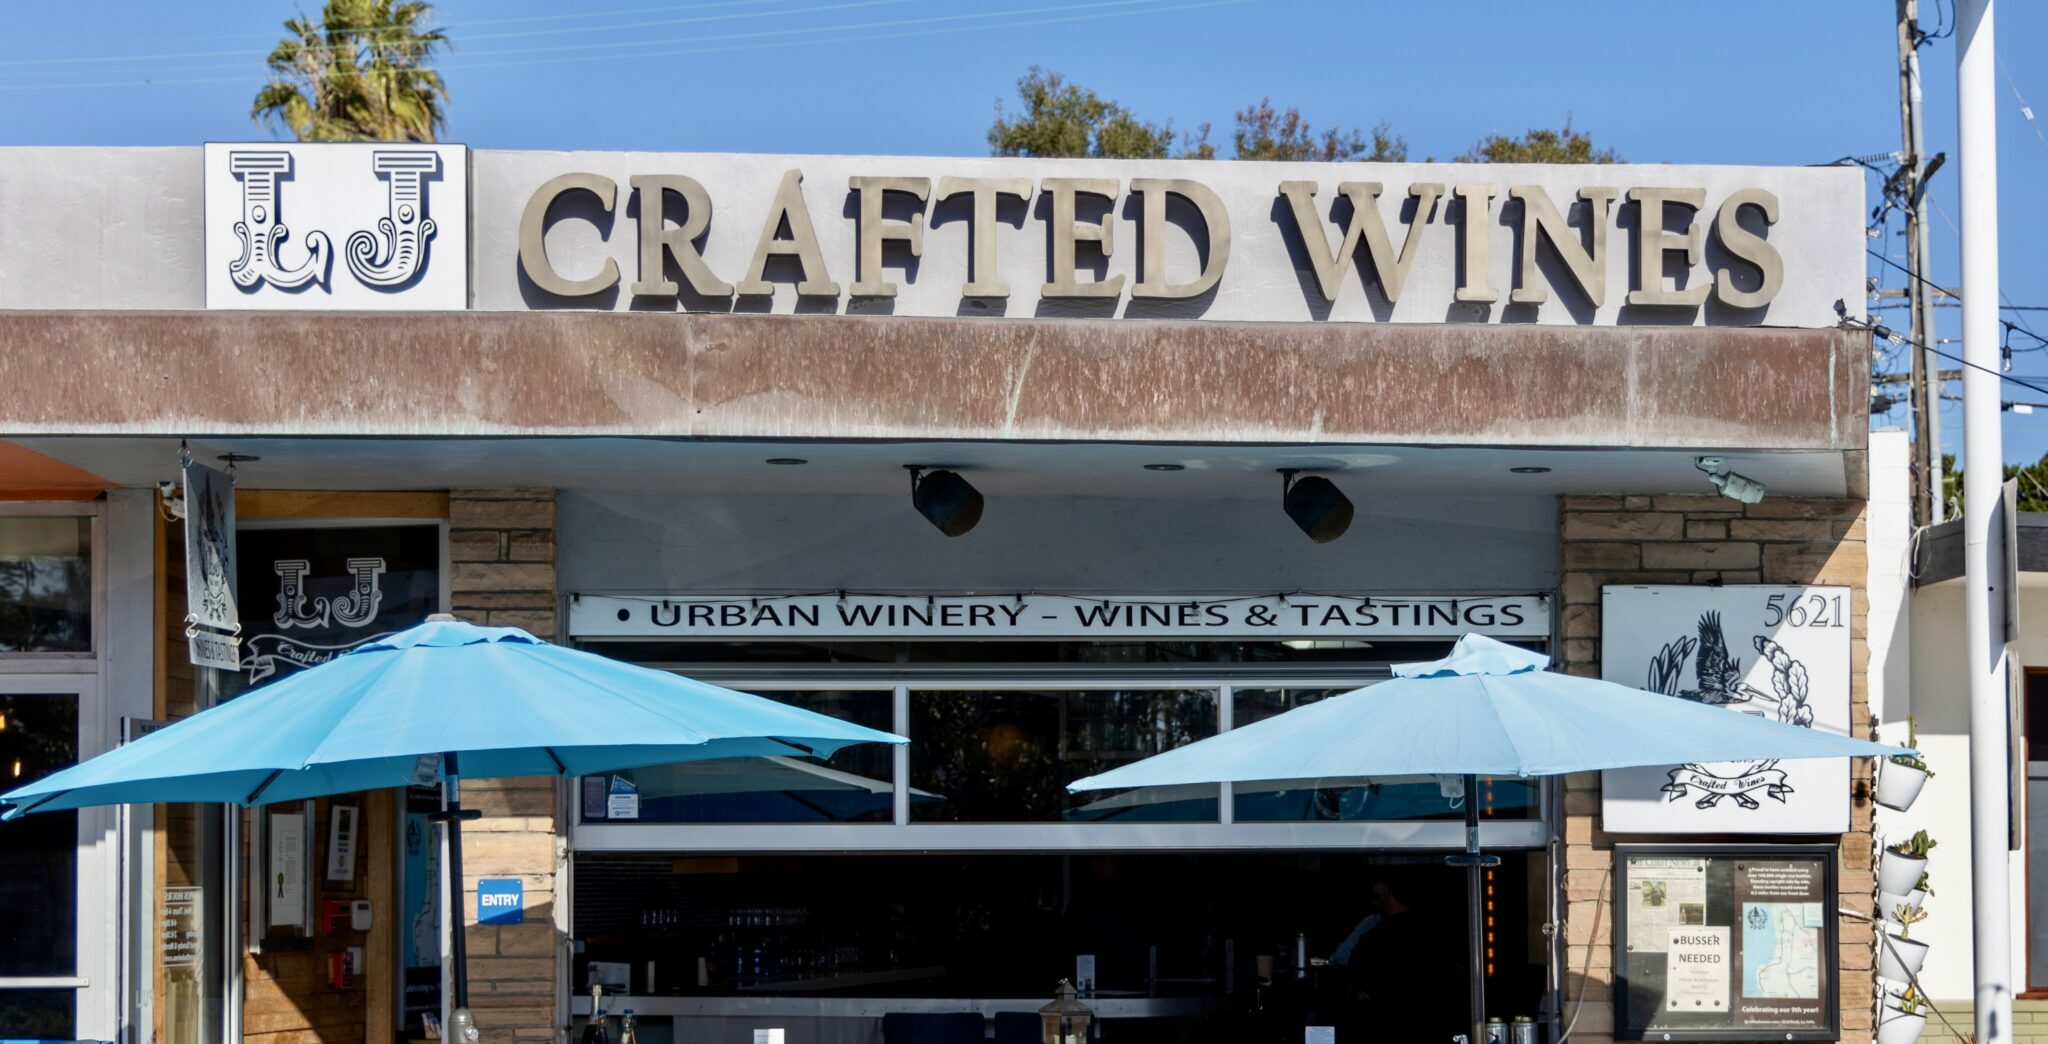 business front of LJ Crafted Wines with two blue umbrellas and patio seating